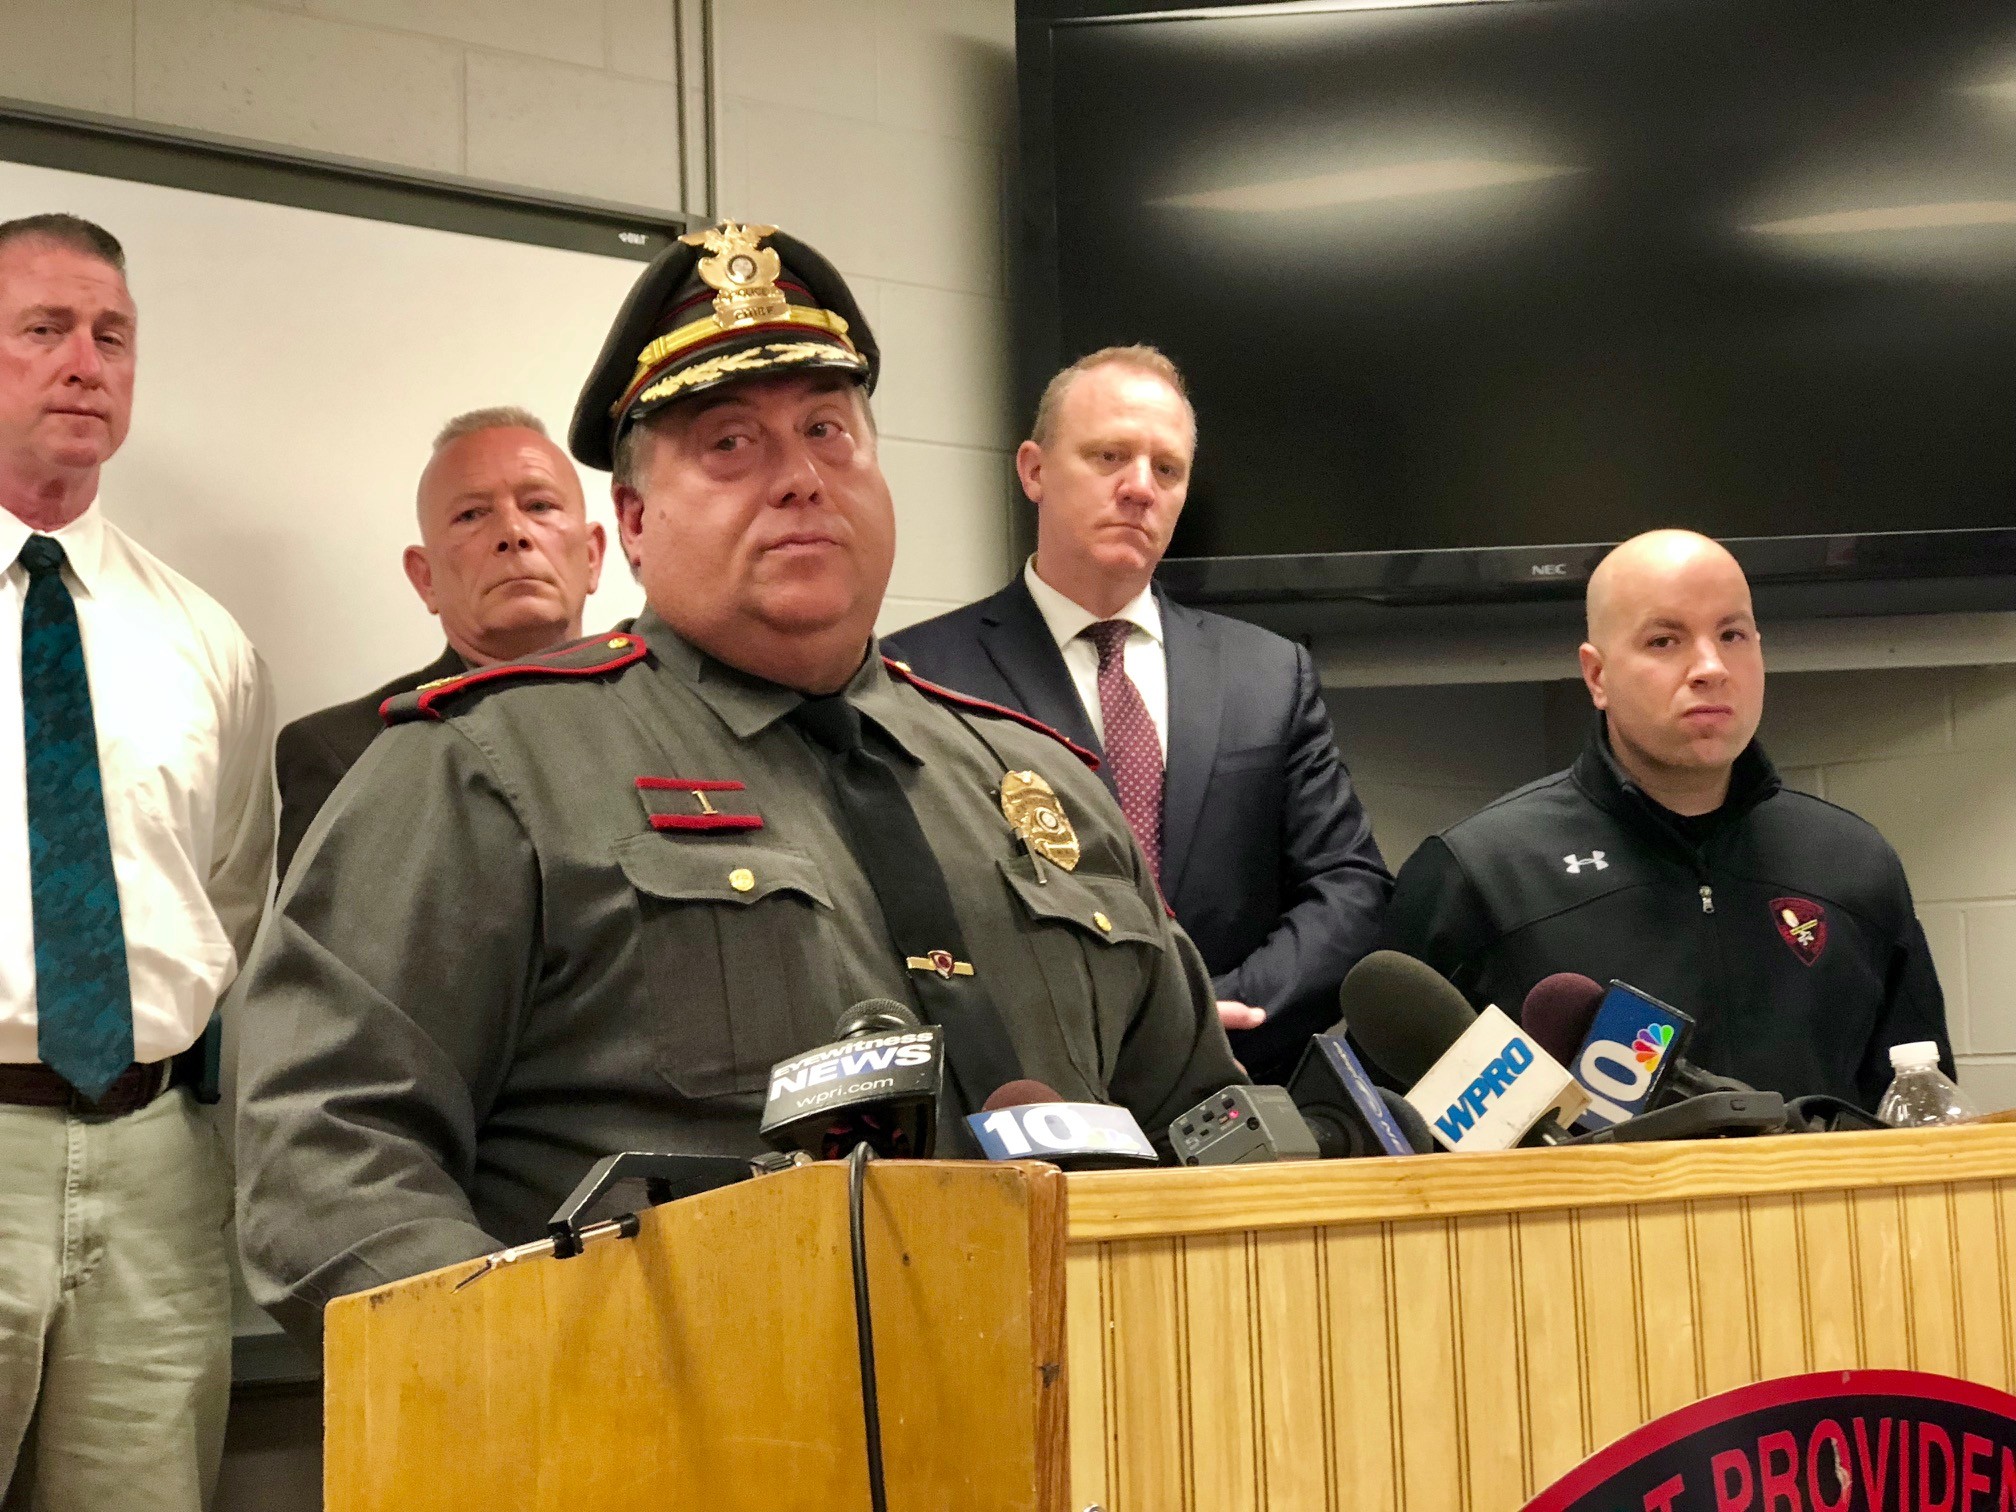 On Tuesday afternoon, East Providence Police Chief Christopher Parella said authorities are confident Mr. Morris is responsible for the death of Dr. Clive Bridgham.